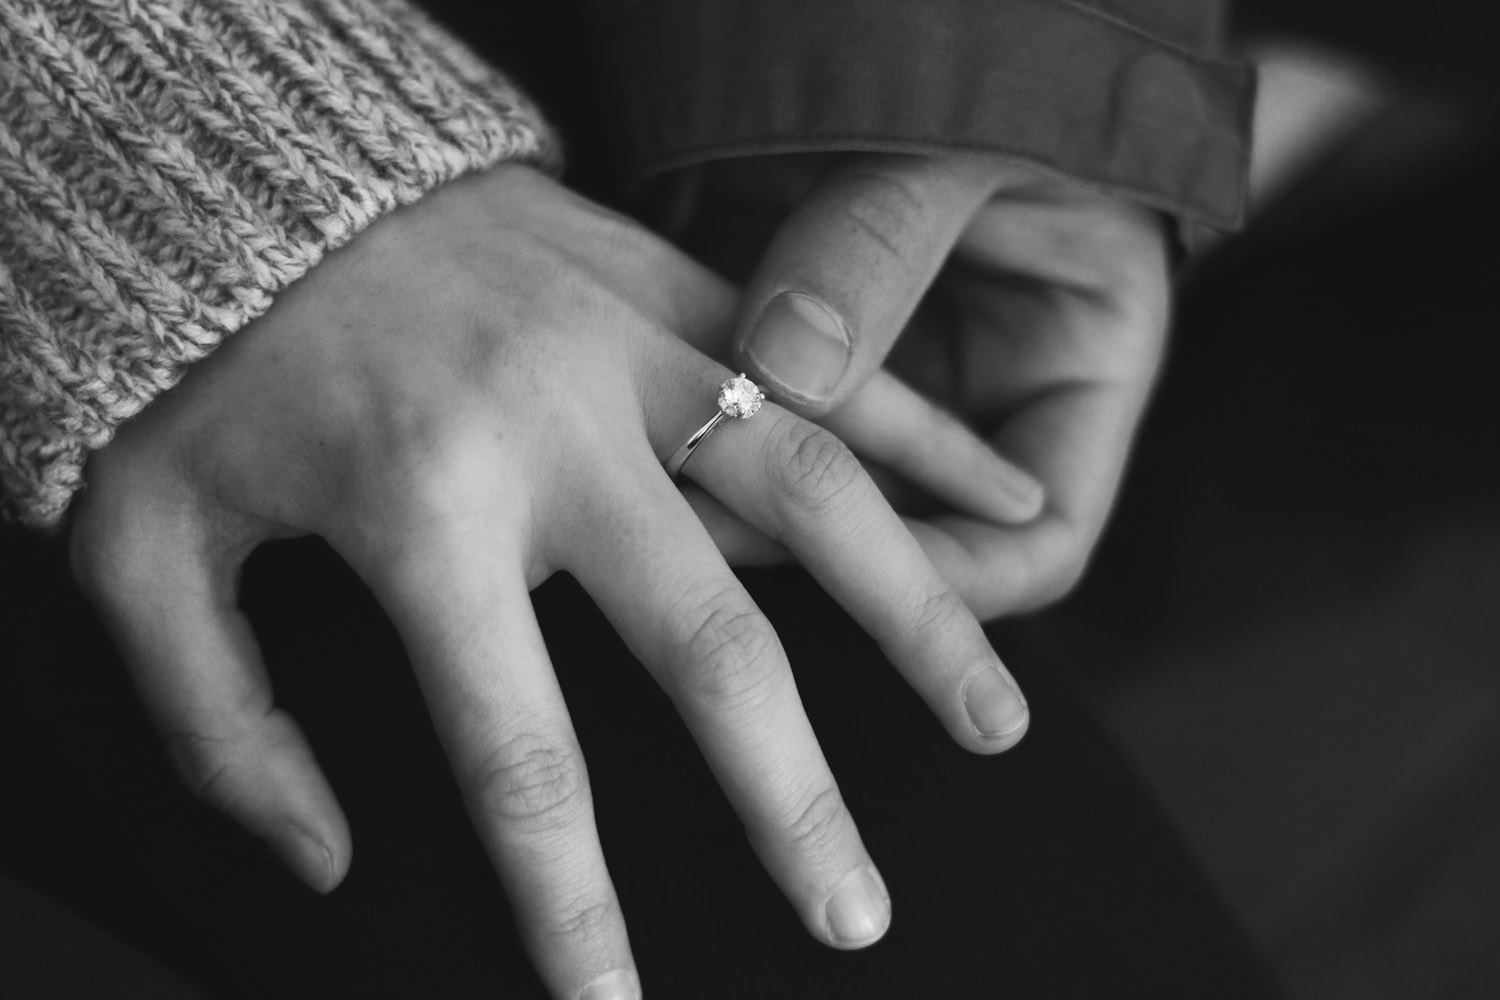 man holding a woman’s hand with an engagement ring on